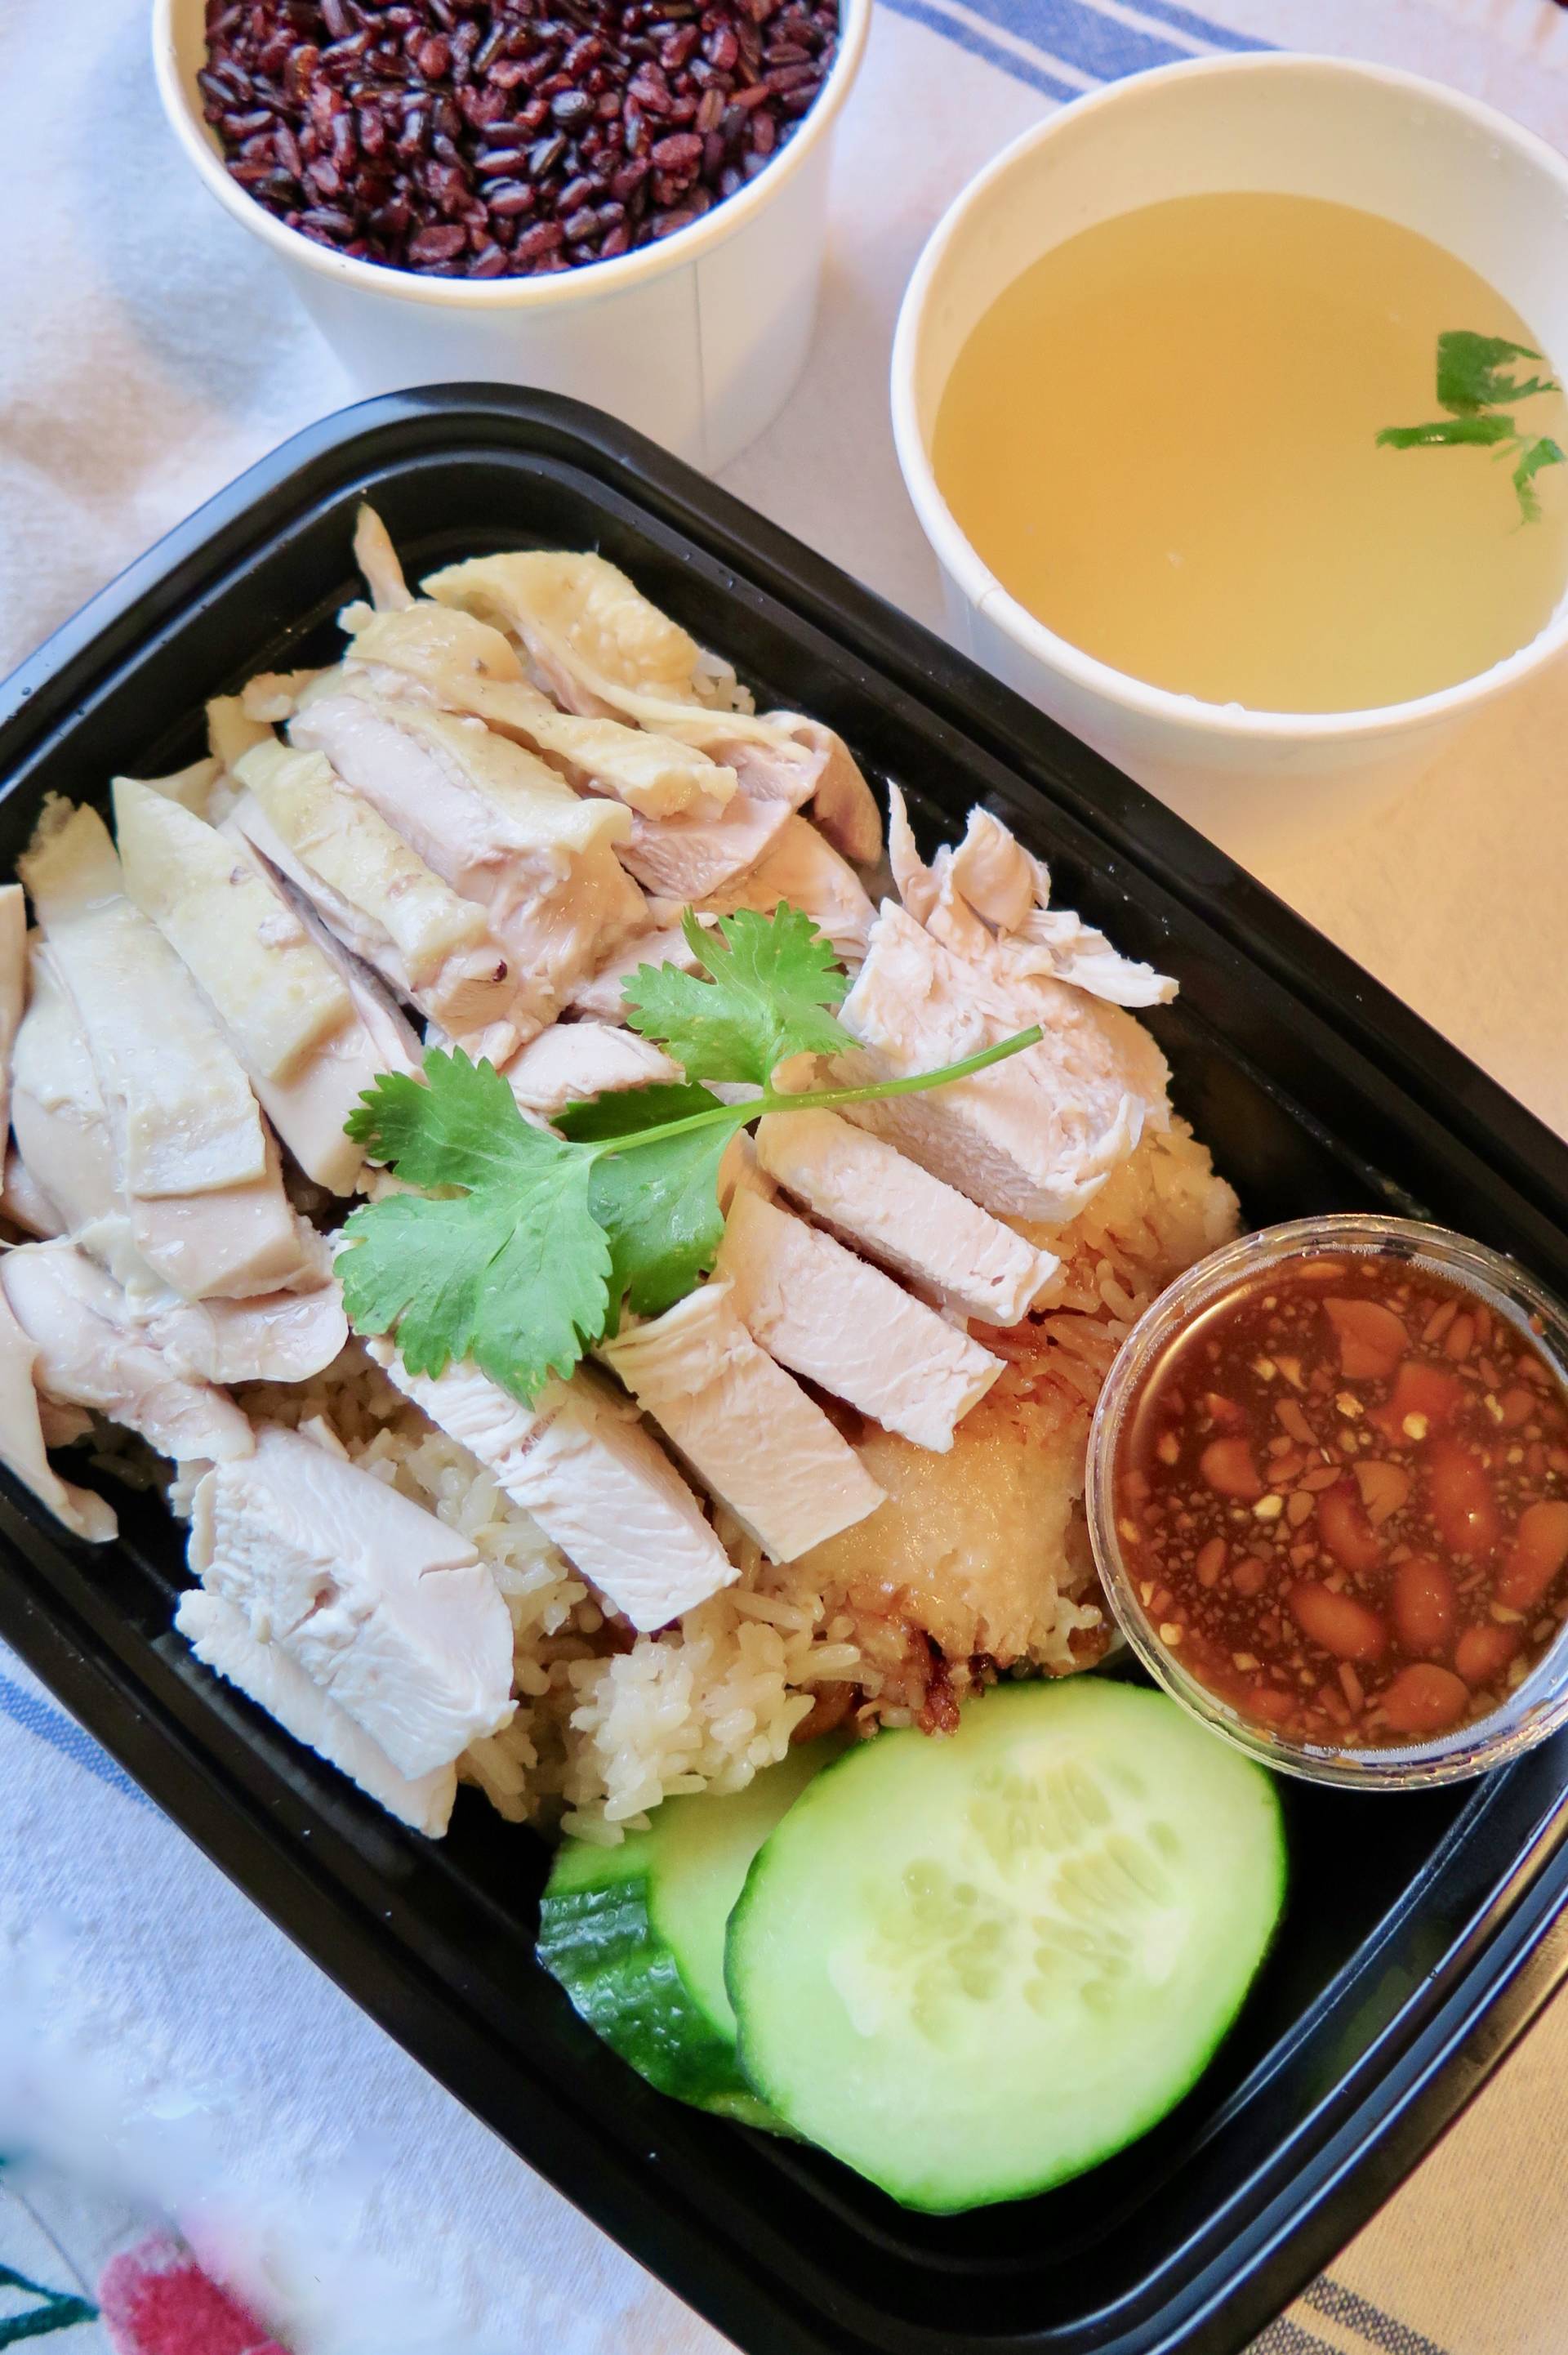 The latest place serving khao mun gai in San Francisco is What the Cluck.